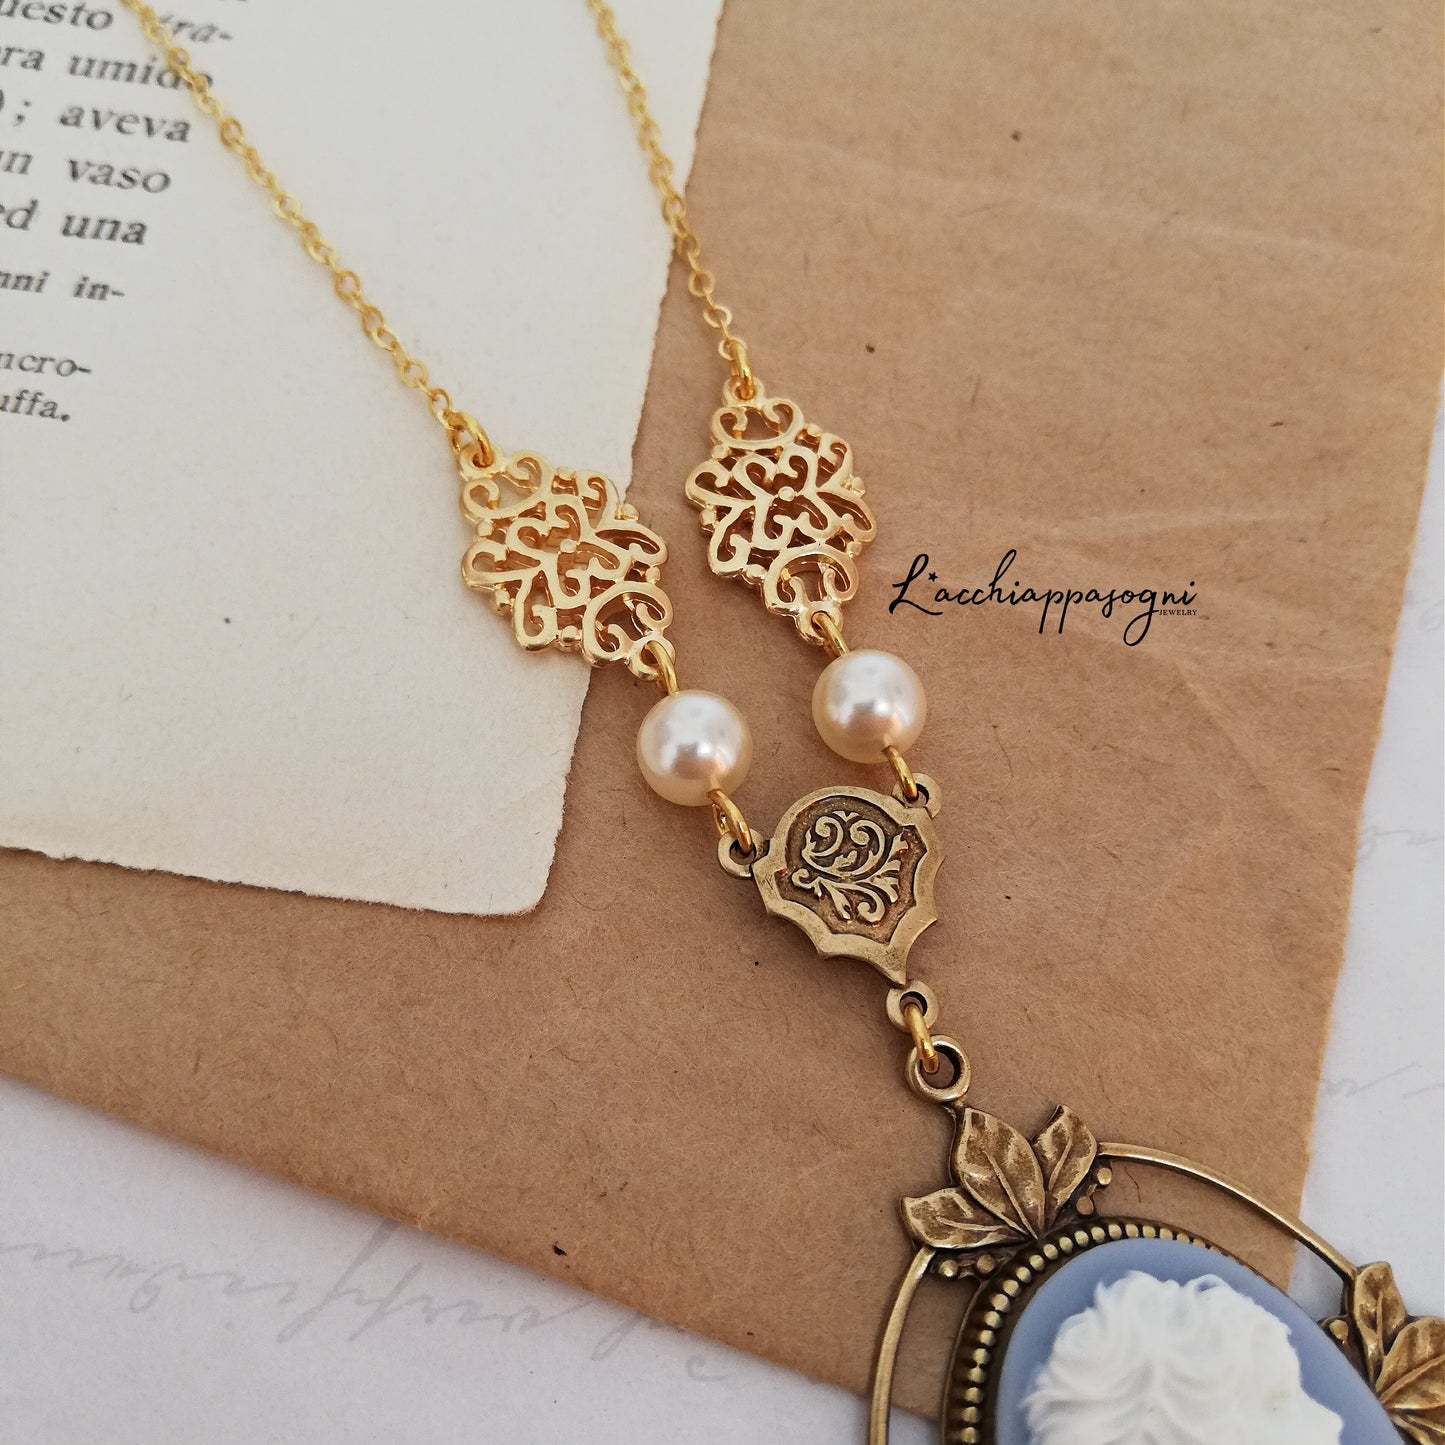 Victorian Cameo Necklace with art deco accents